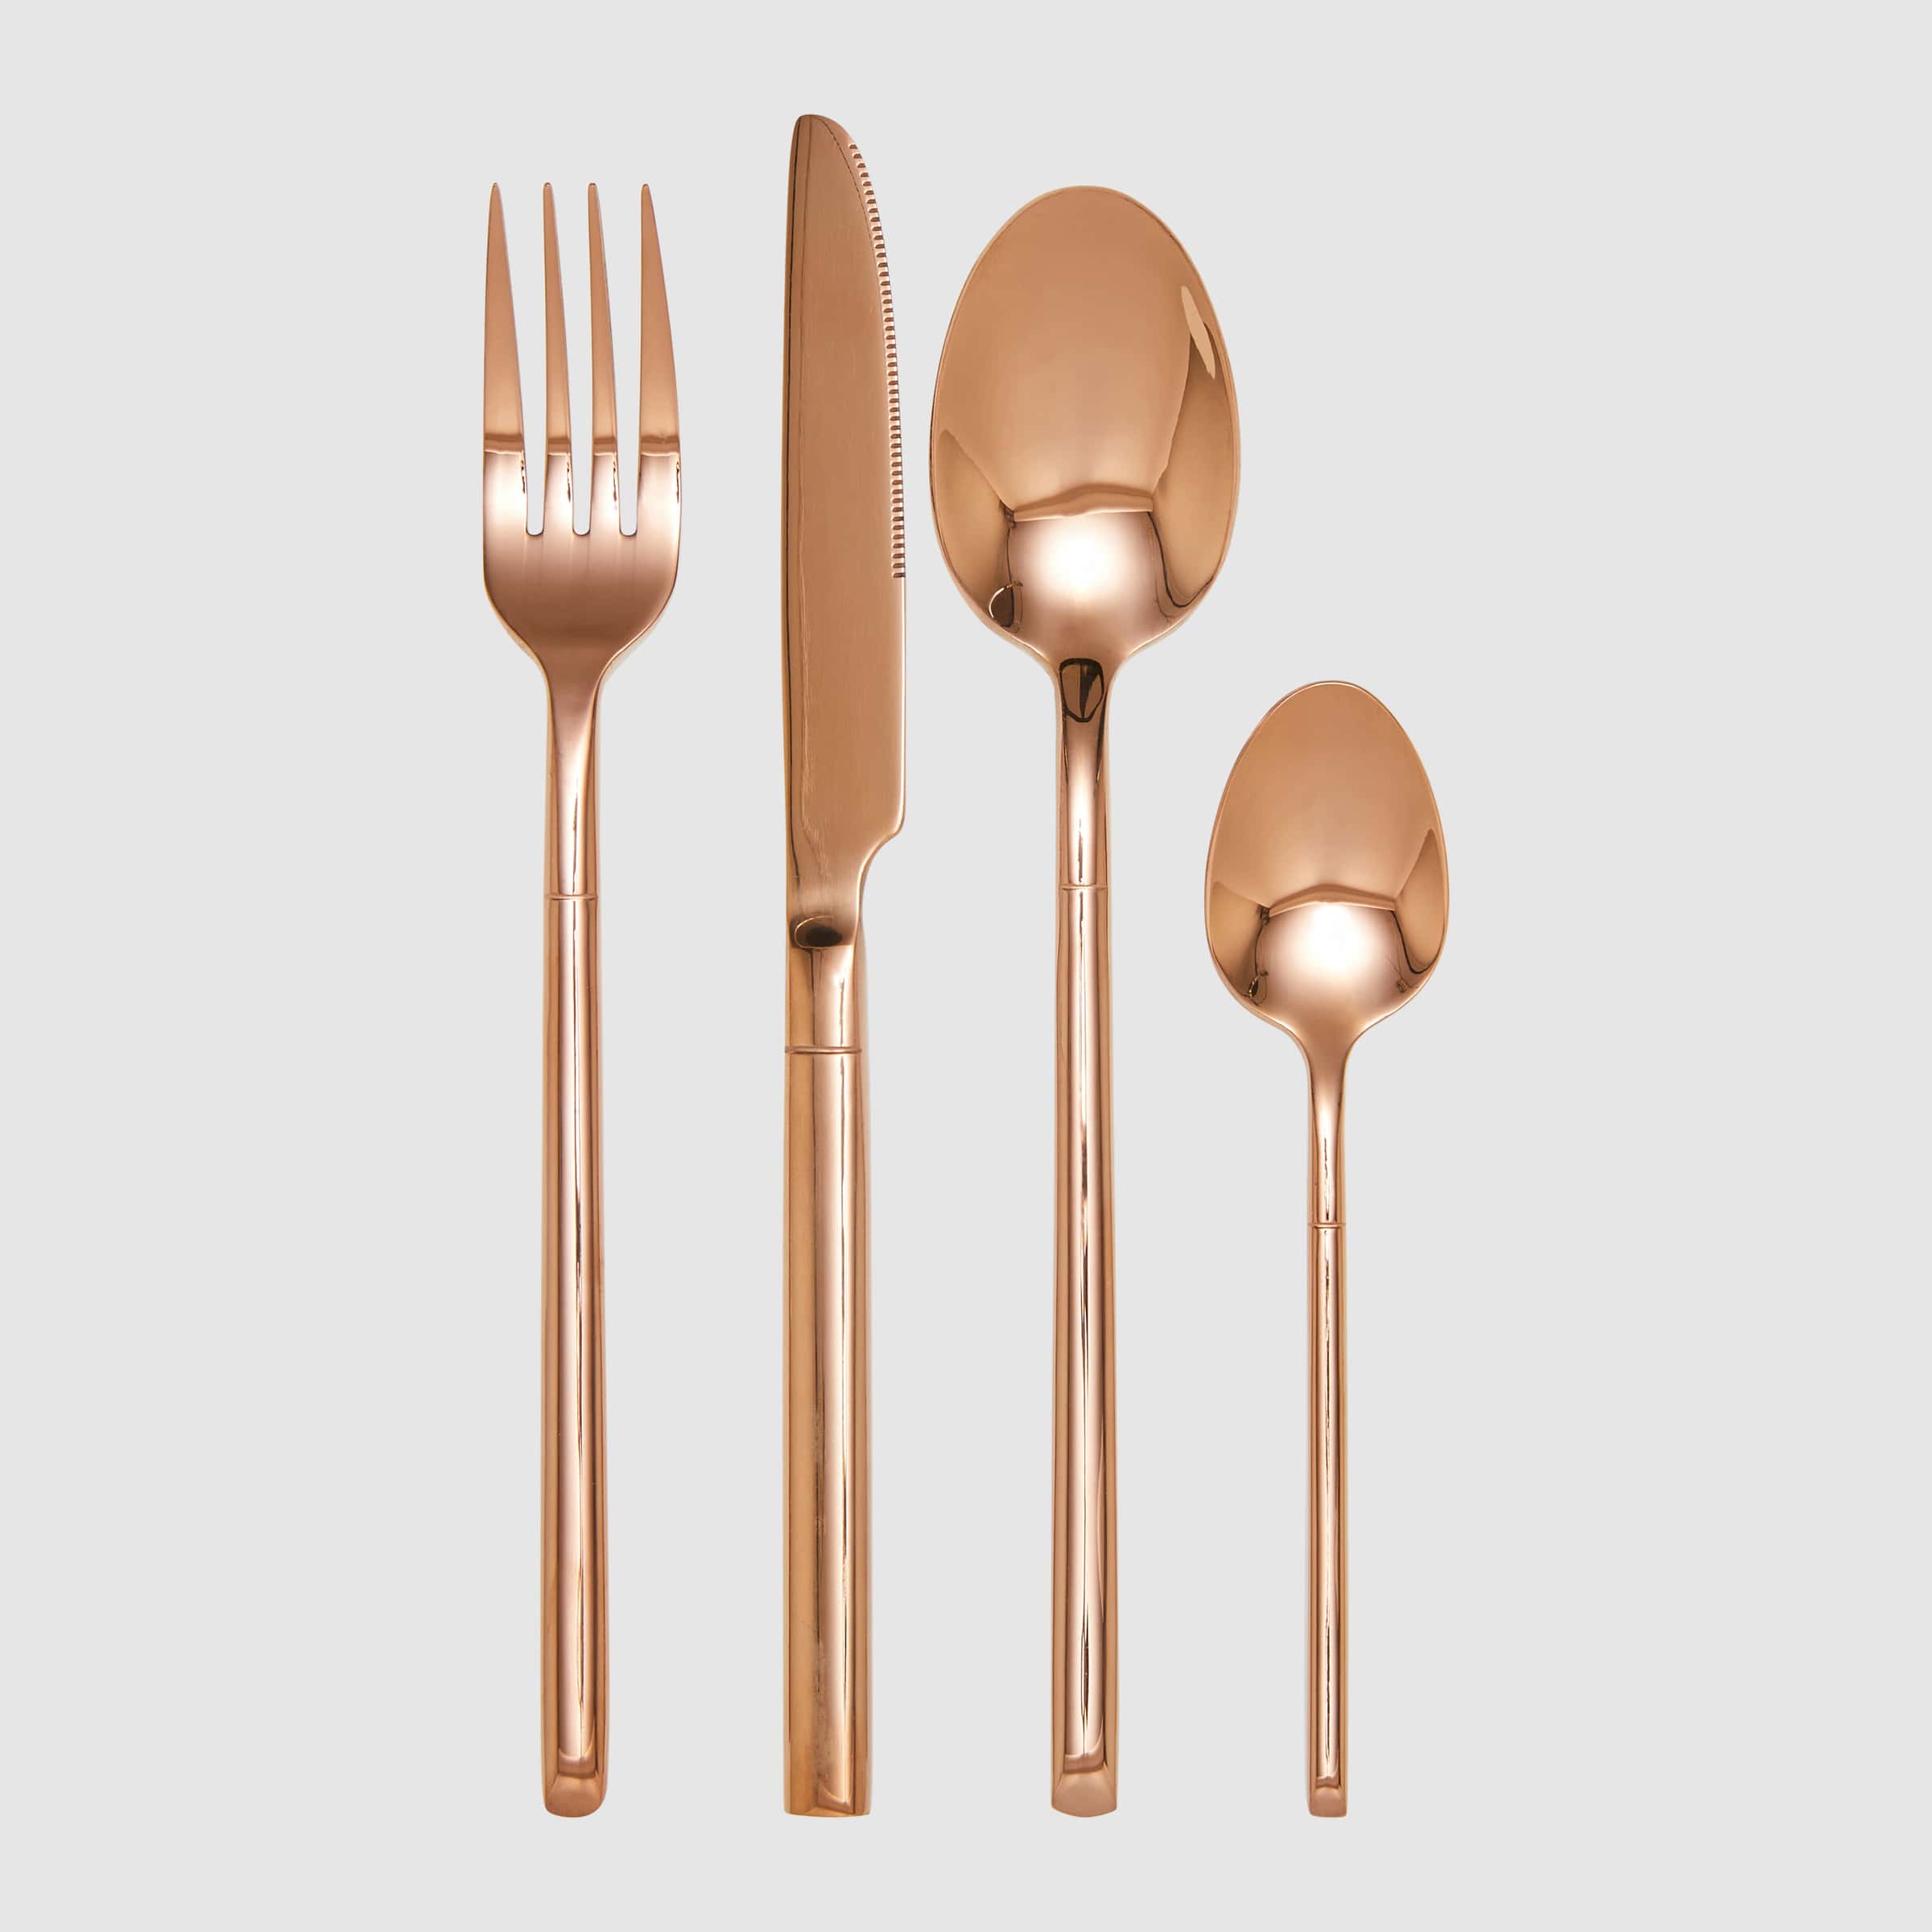 Moroccan Cutlery Set - 4pc - Buy Flatware Sets Online at FRANKY'S